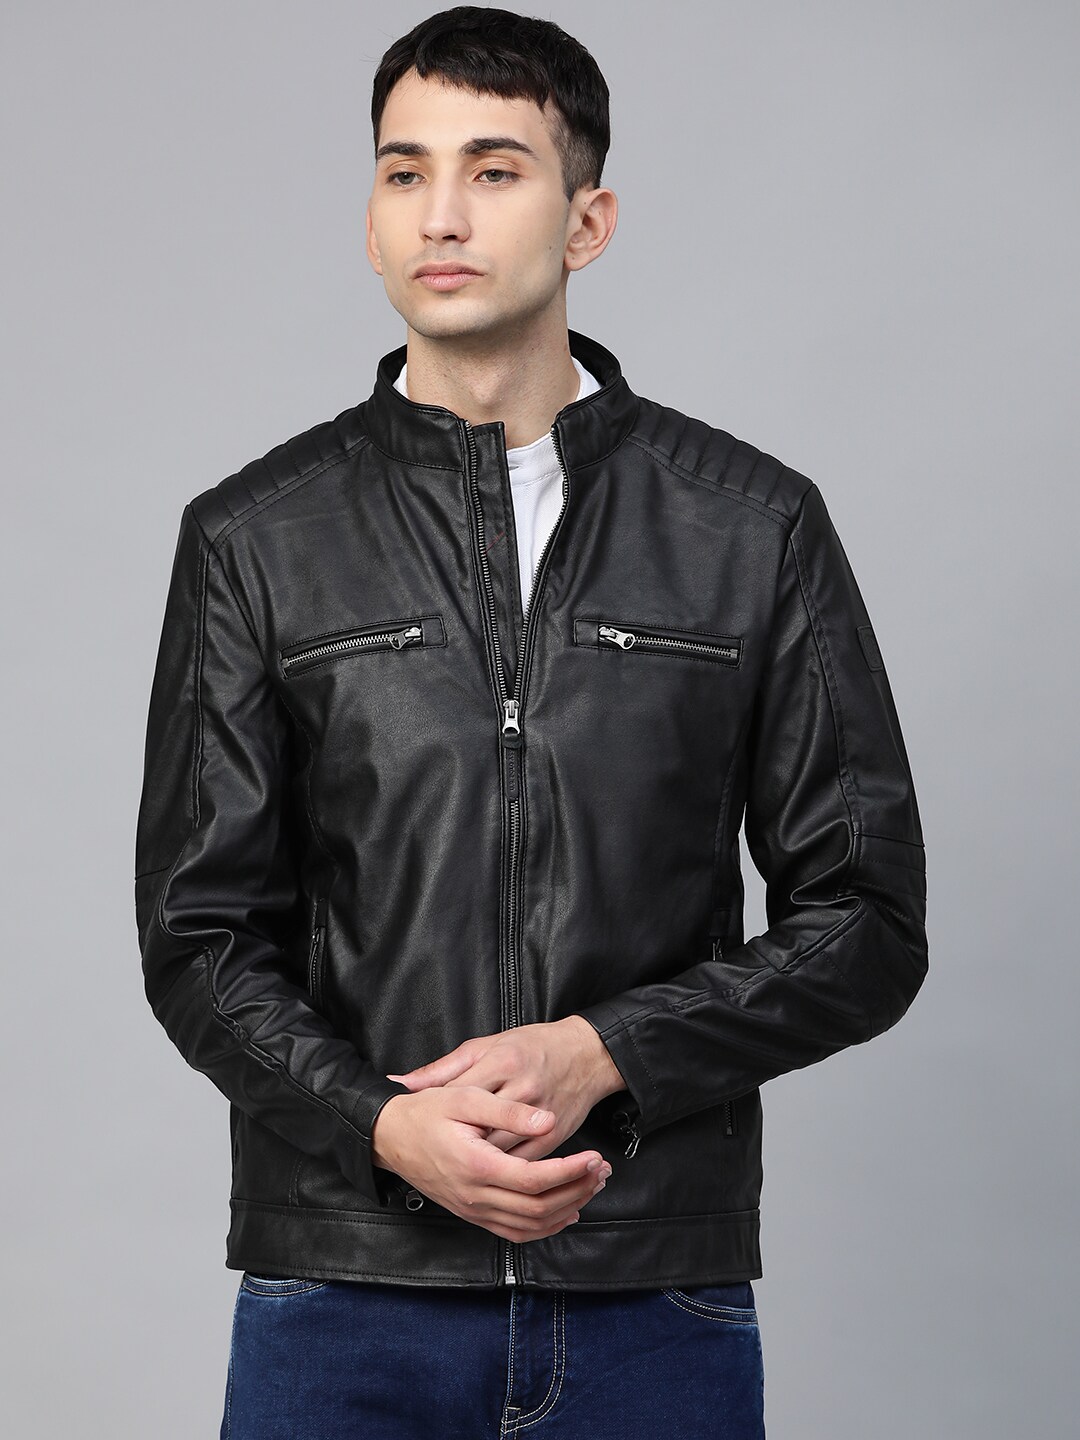 Buy US Polo Men's Leather Jacket (8907378418593_USJK1559_XXX-Large_Brown)  at Amazon.in